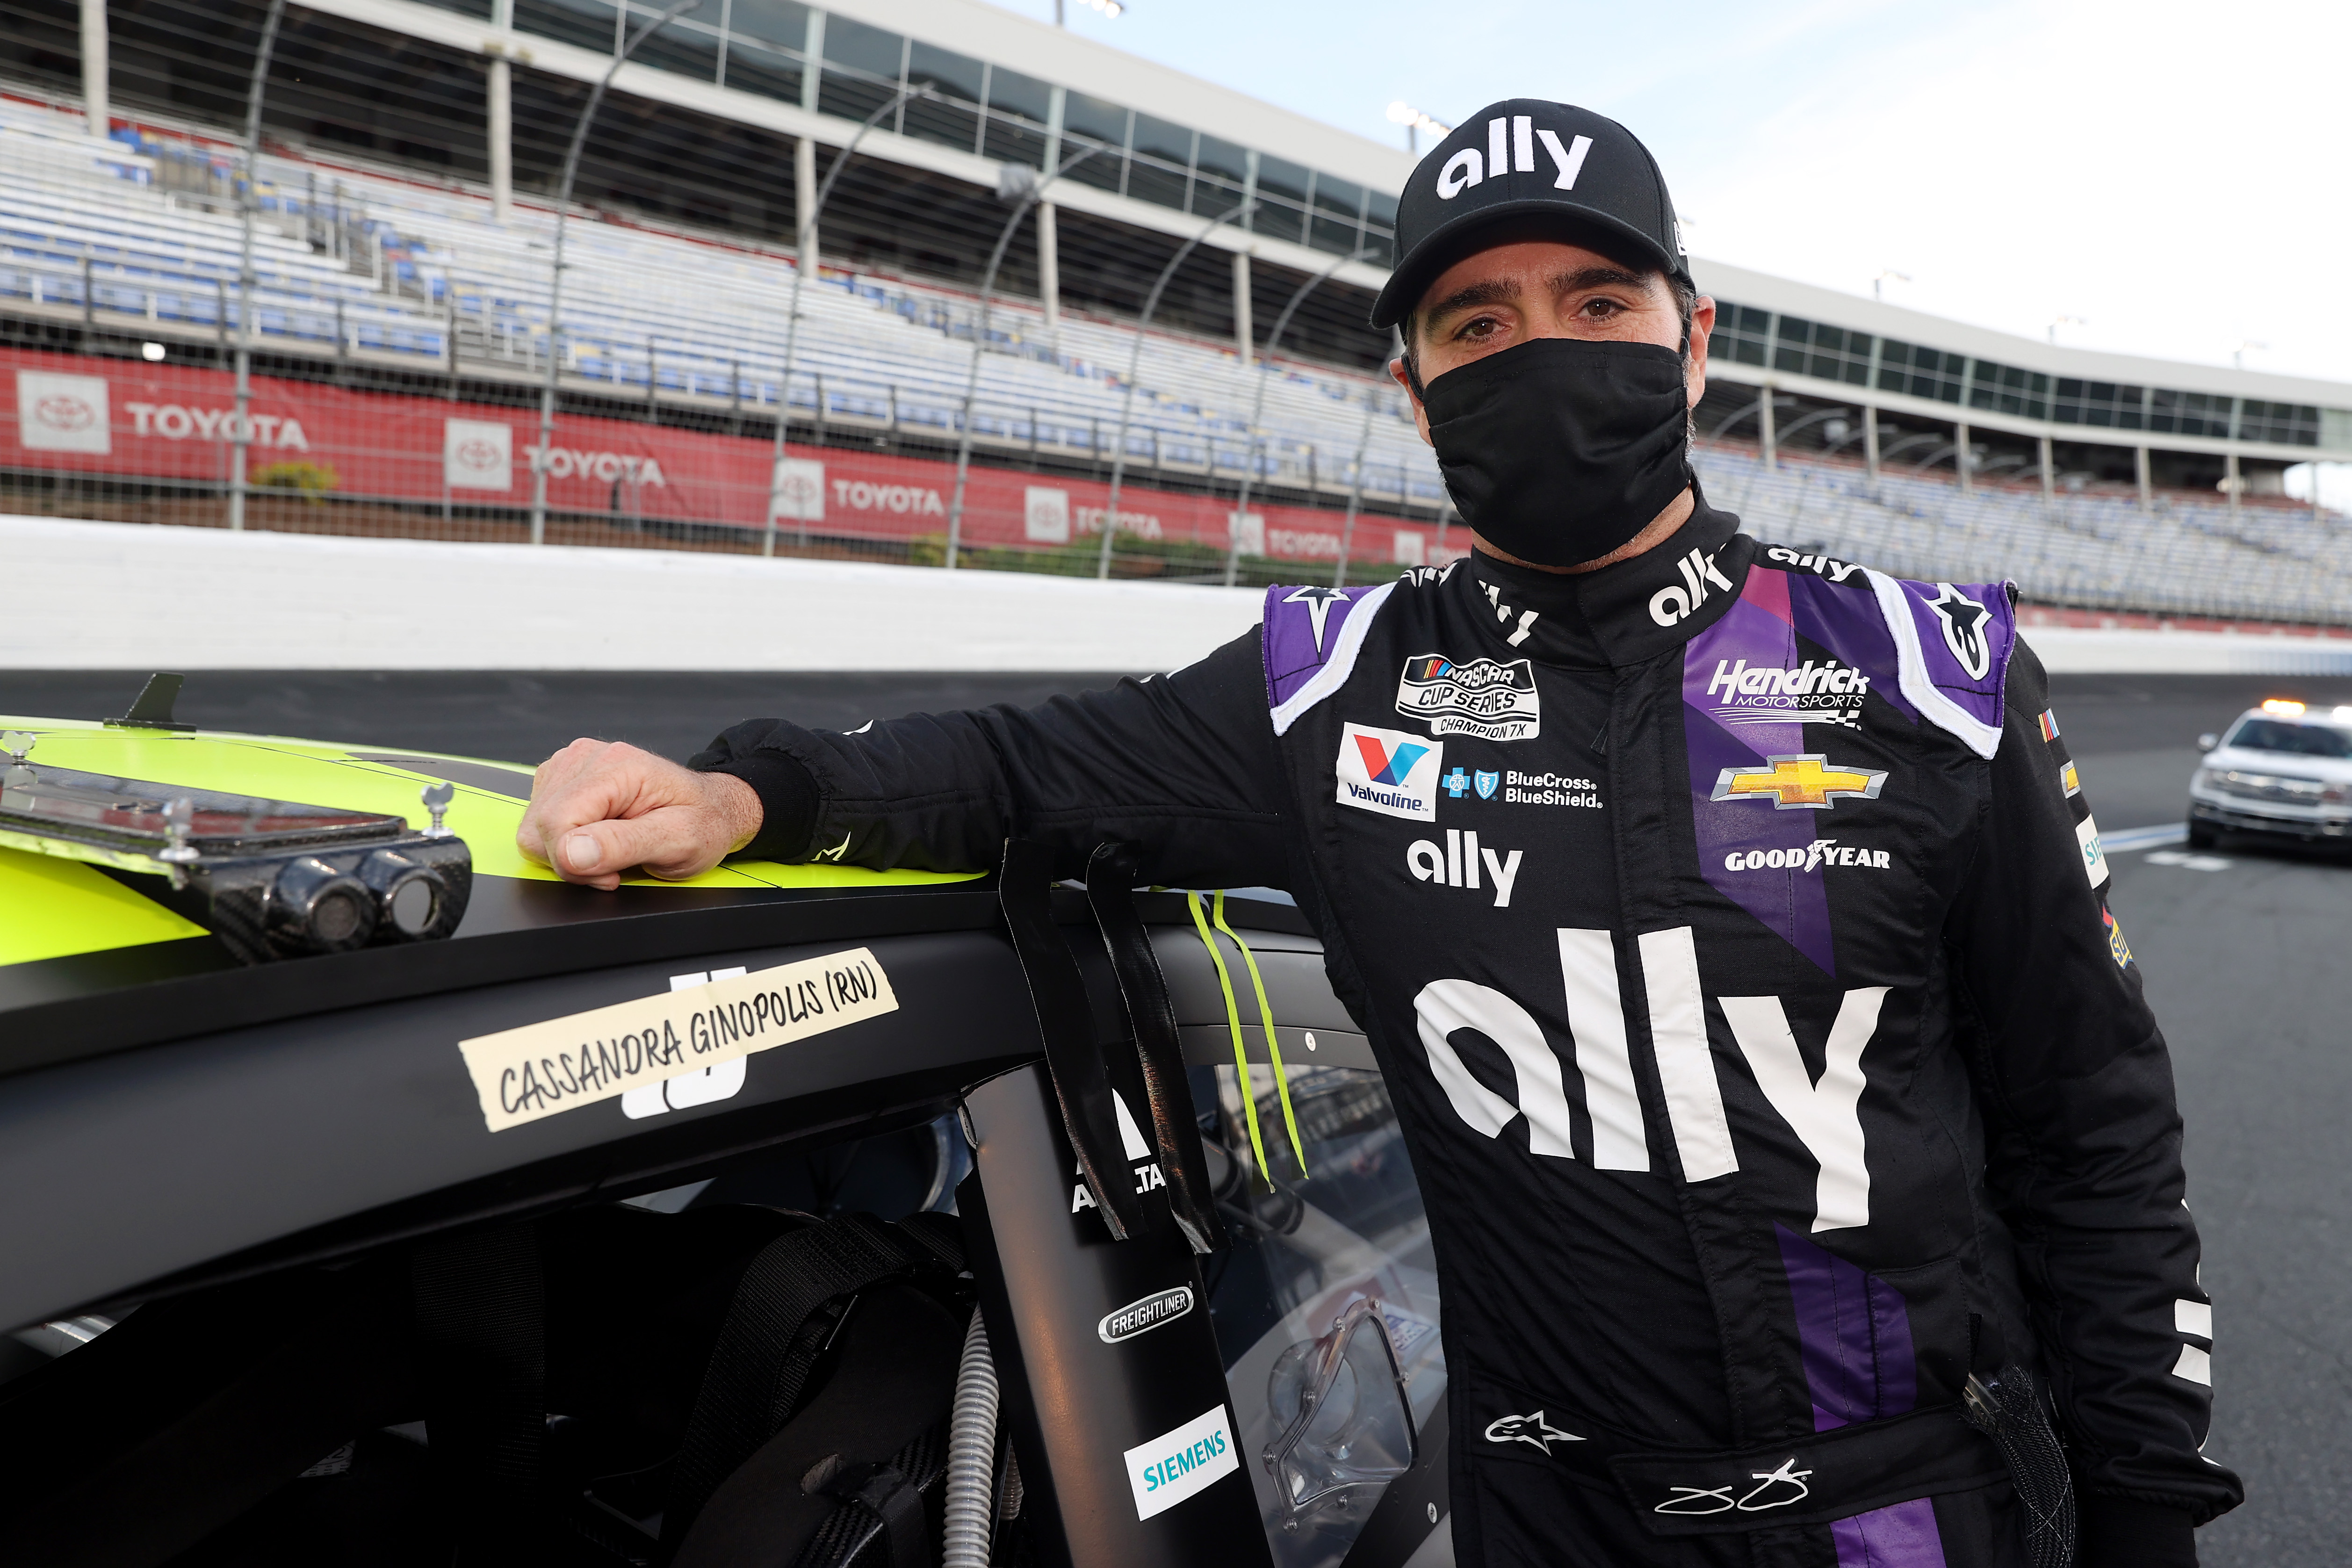 Jimmie Johnson Nascar Try To Take Proper Stand In Conversation On Race The Boston Globe